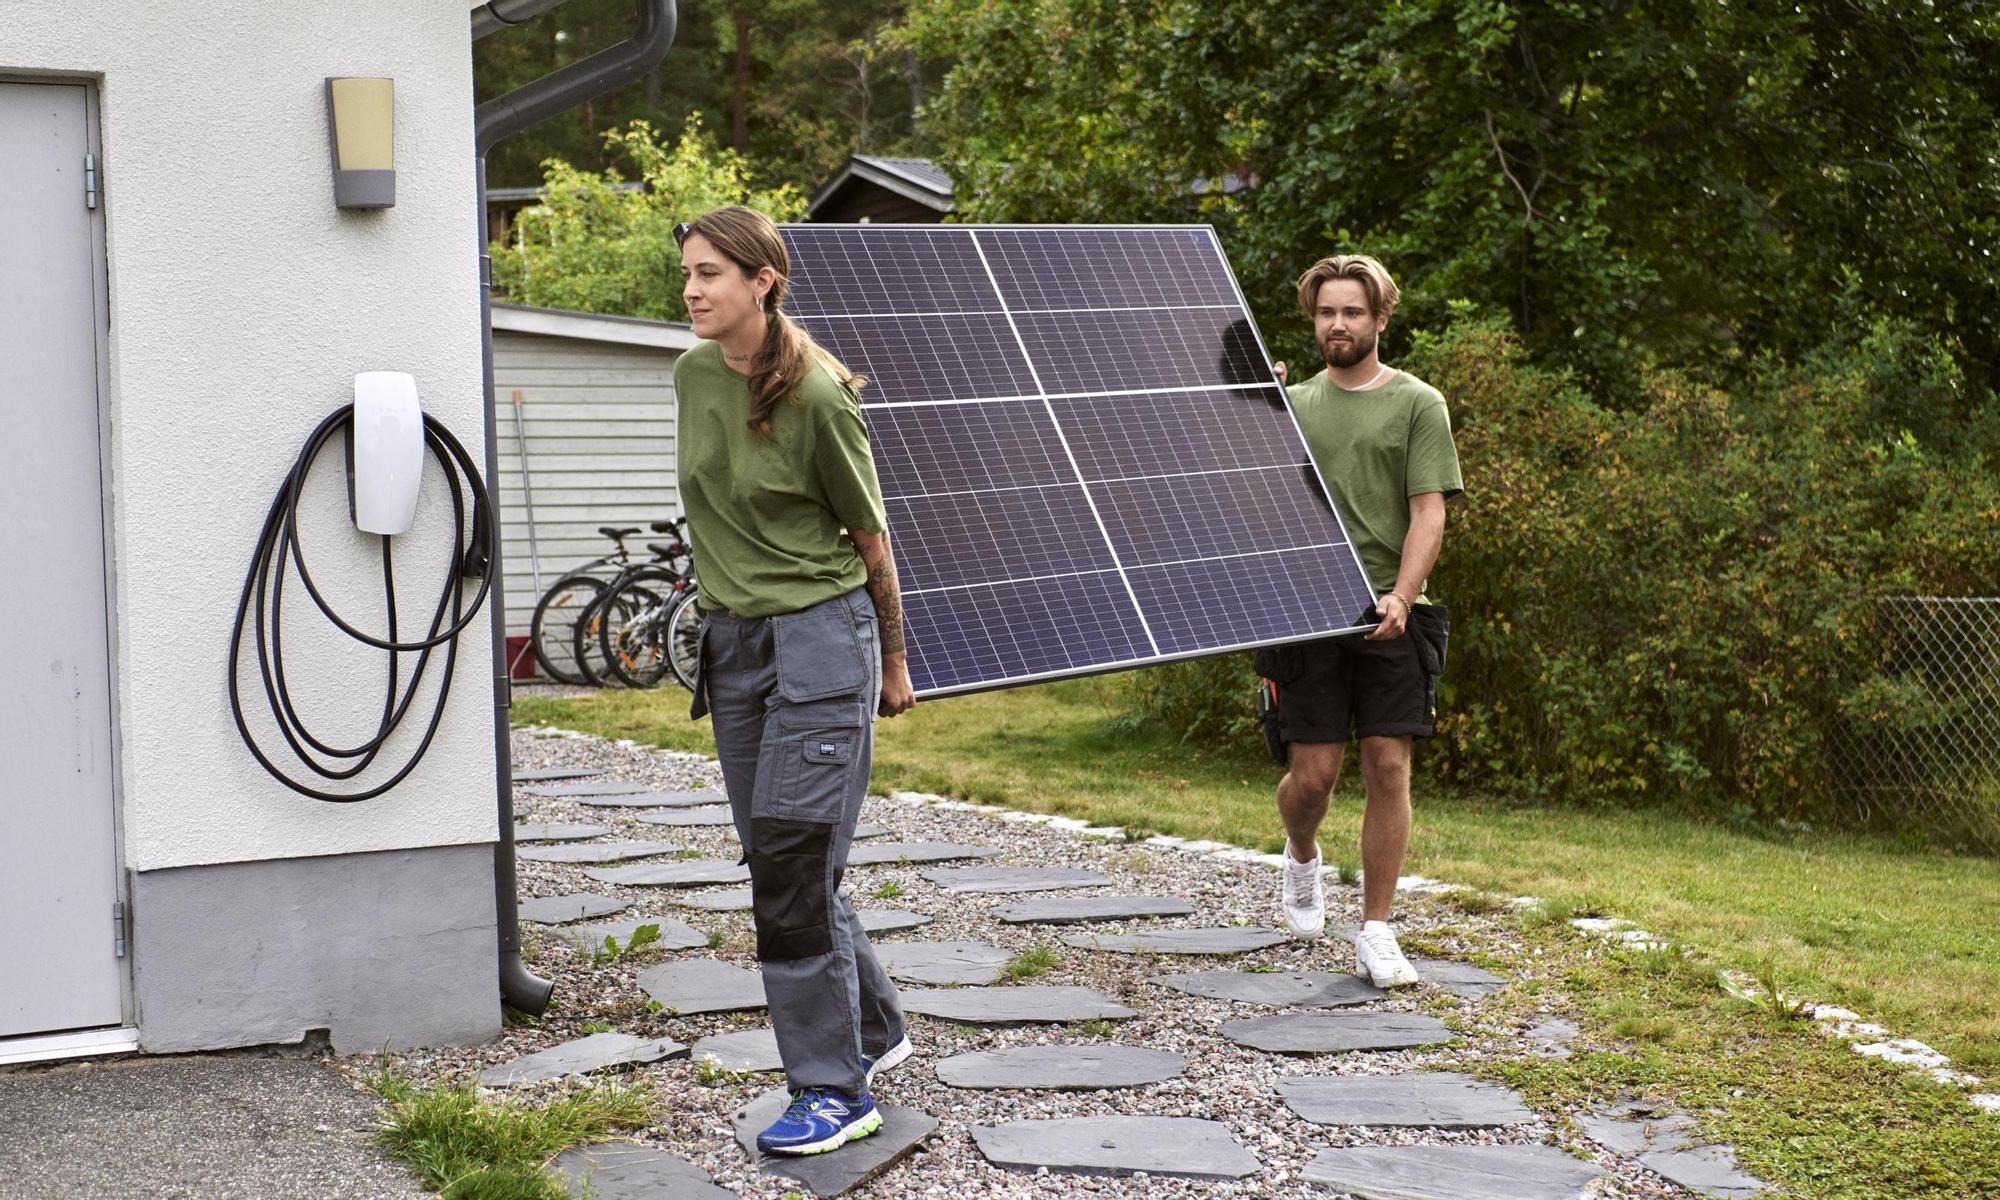 Two workers carrying solar panel together